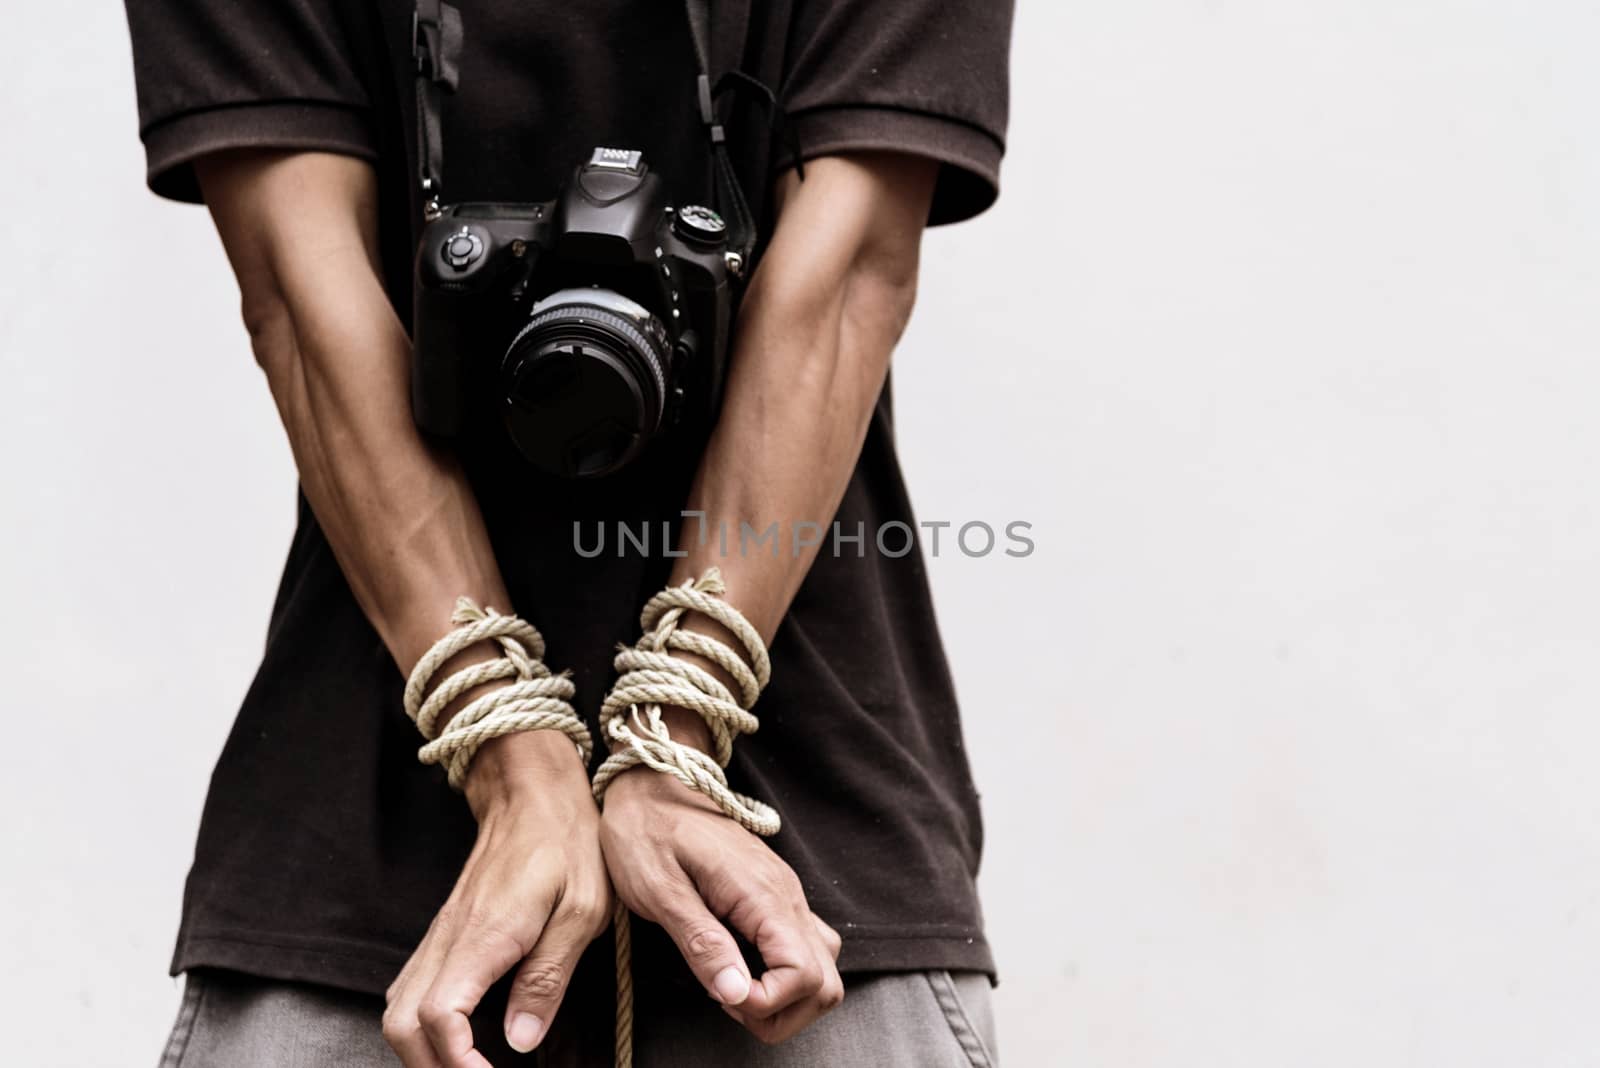 slave photographer / photographer has bundle by rope by rukawajung